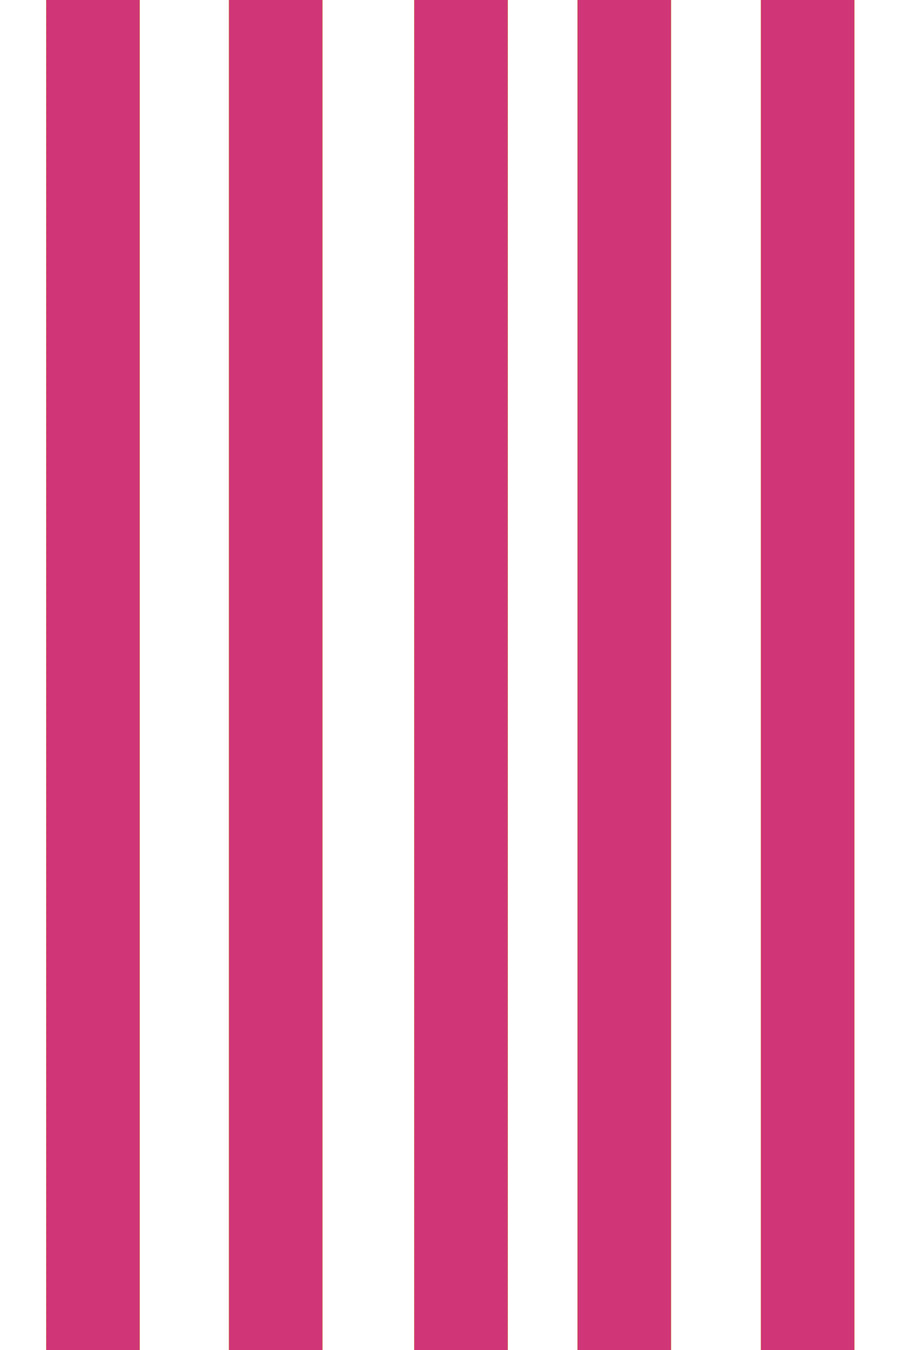 Woolf With Me Fitted Crib Sheet Stripes color_pink-yarrow